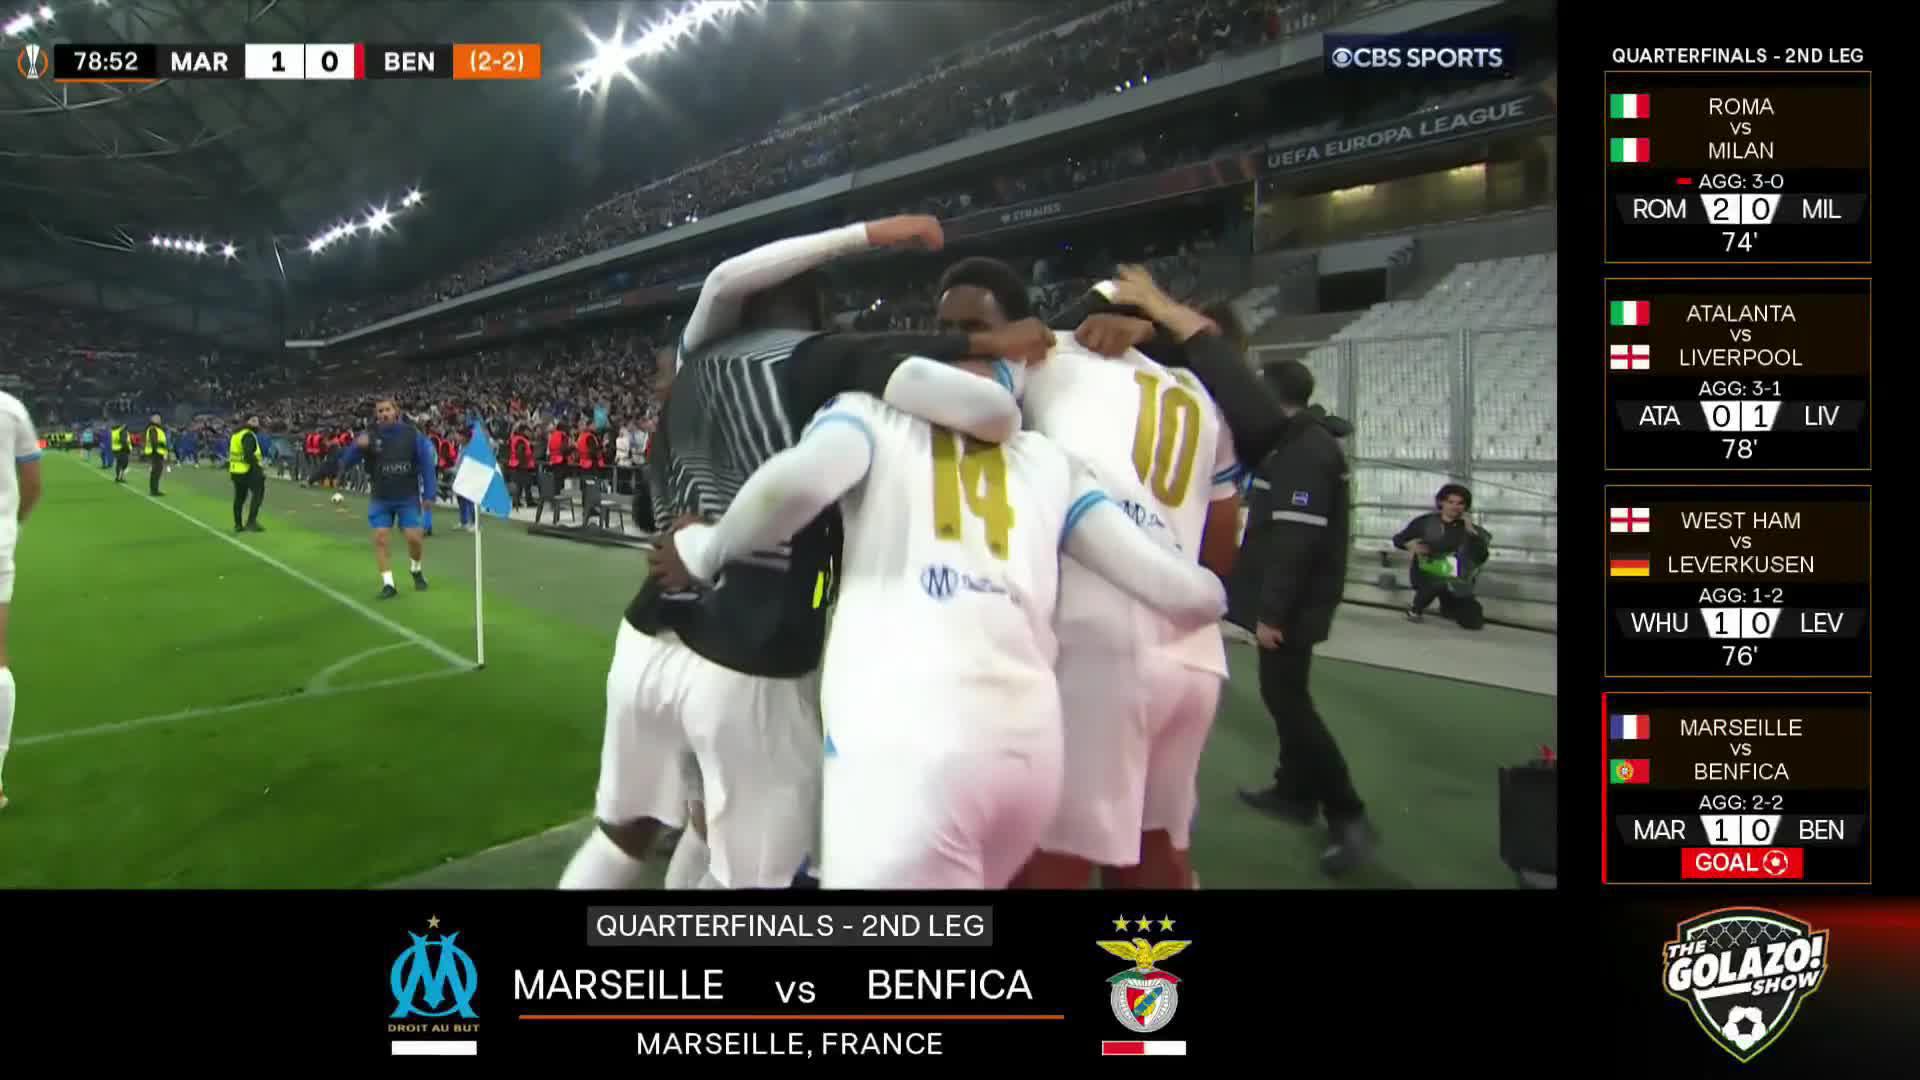 MARSEILLE GET THEIR EQUALIZER AGAINST BENFICA 😱